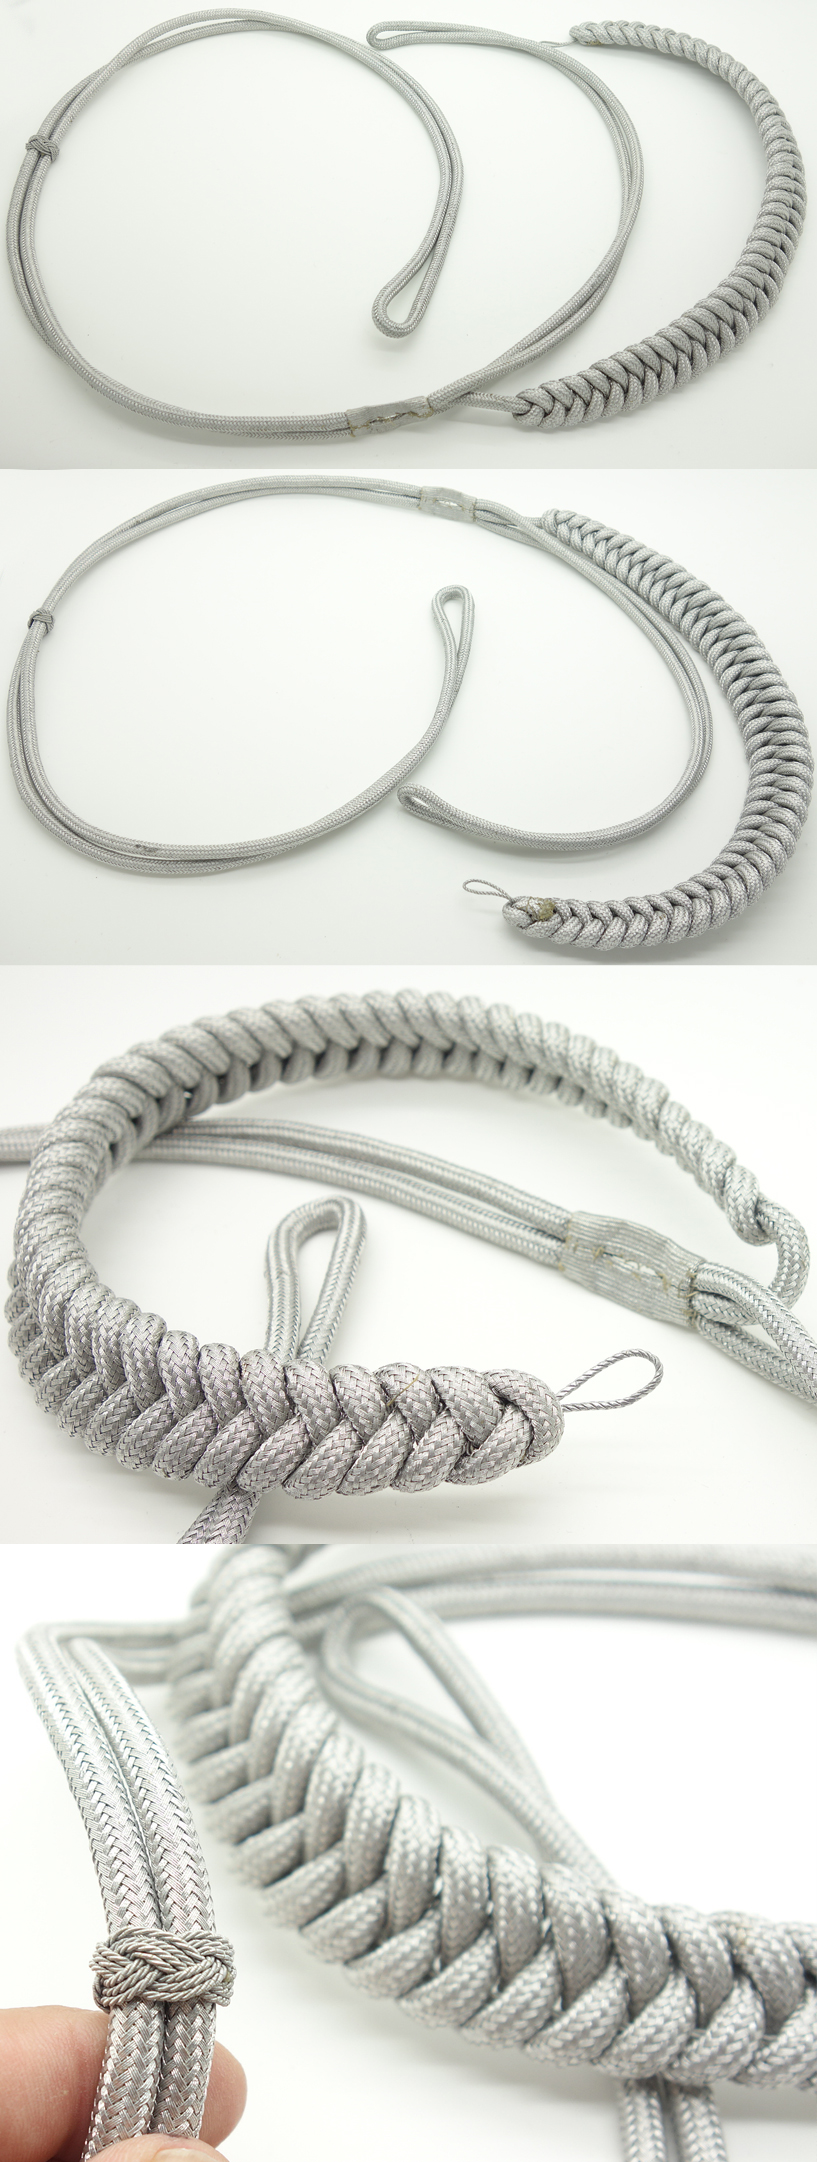 Wehrmacht Army Officer’s Aiguillette